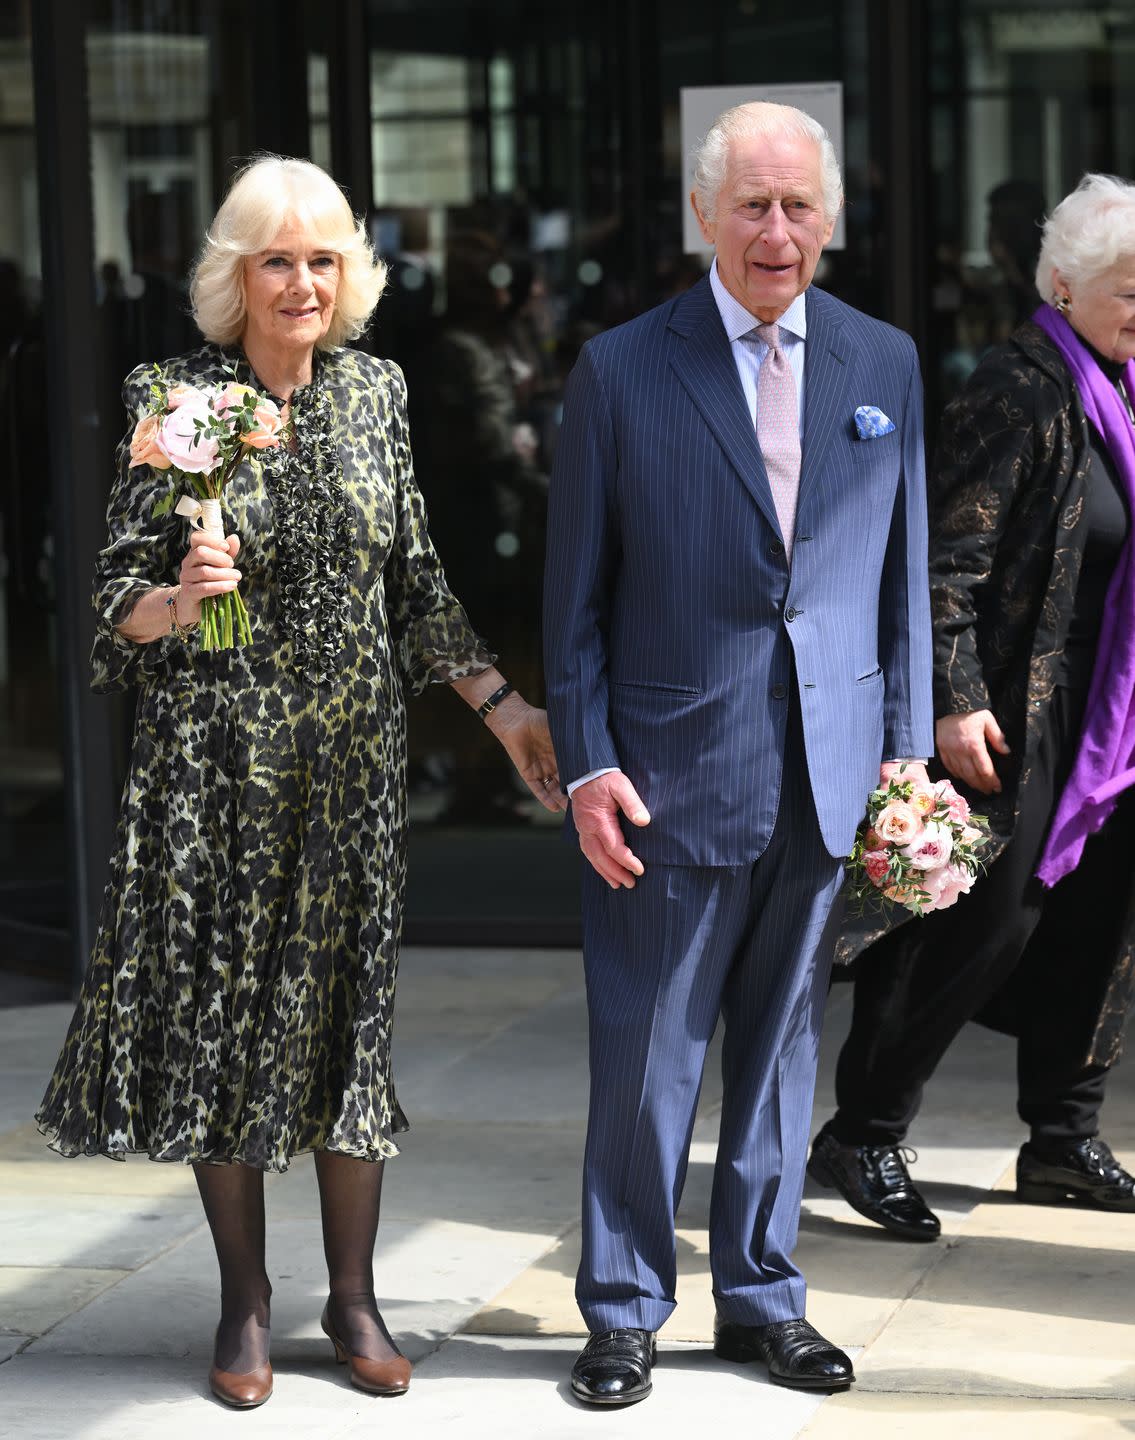 london, england april 30 king charles iii and queen camilla depart after visiting the university college hospital macmillan cancer centre on april 30, 2024 in london, england this visit raises awareness of the importance of early diagnosis and will highlight some of the innovative research, supported by cancer research uk, which is taking place at the hospital the visit also marks his majesty’s first day as the new patron of cancer research uk photo by karwai tangwireimage